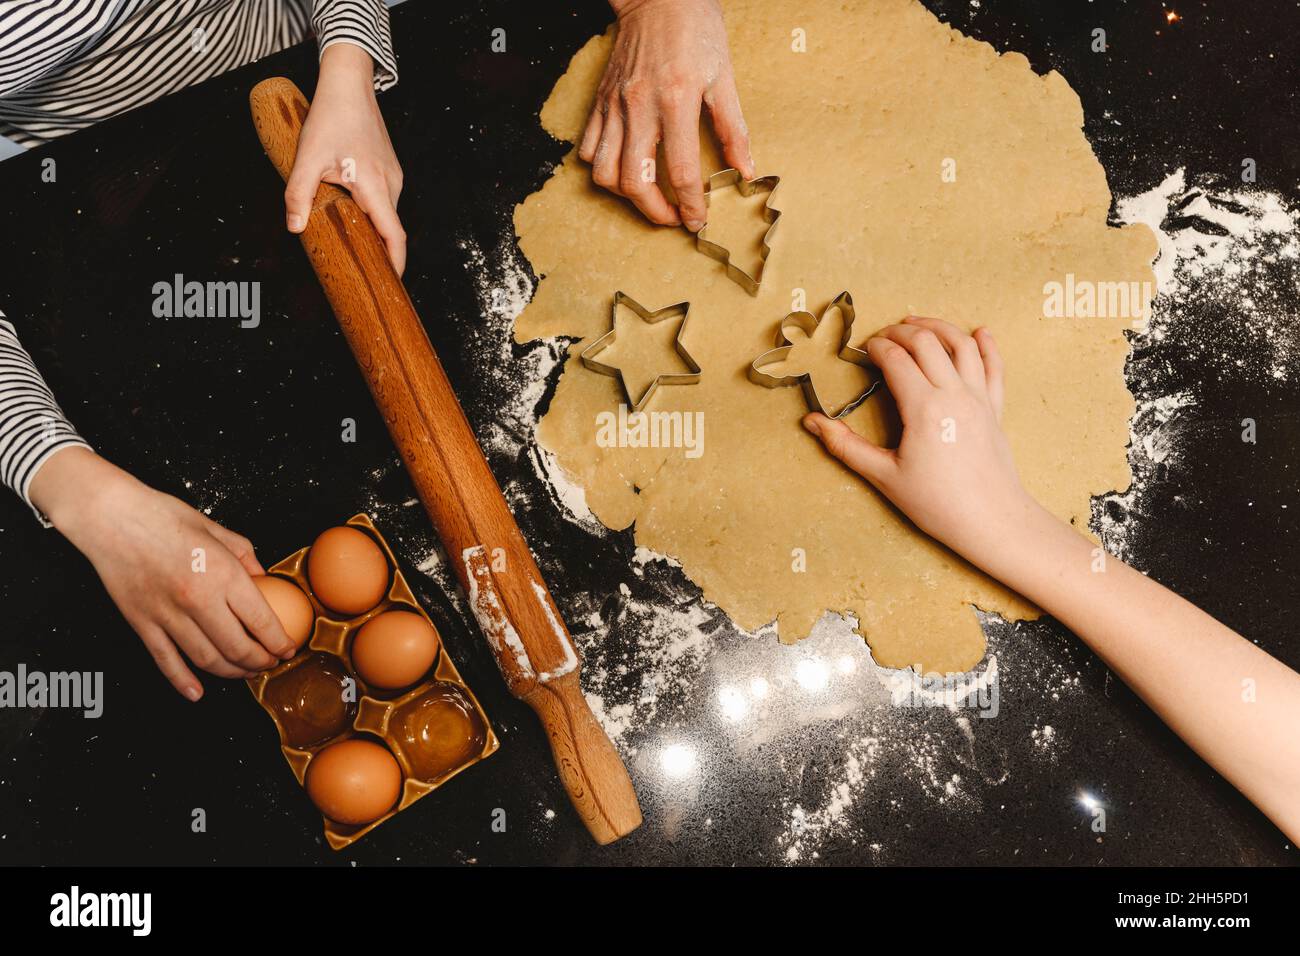 Family preparing cookies with cookie cutter on kitchen island Stock Photo